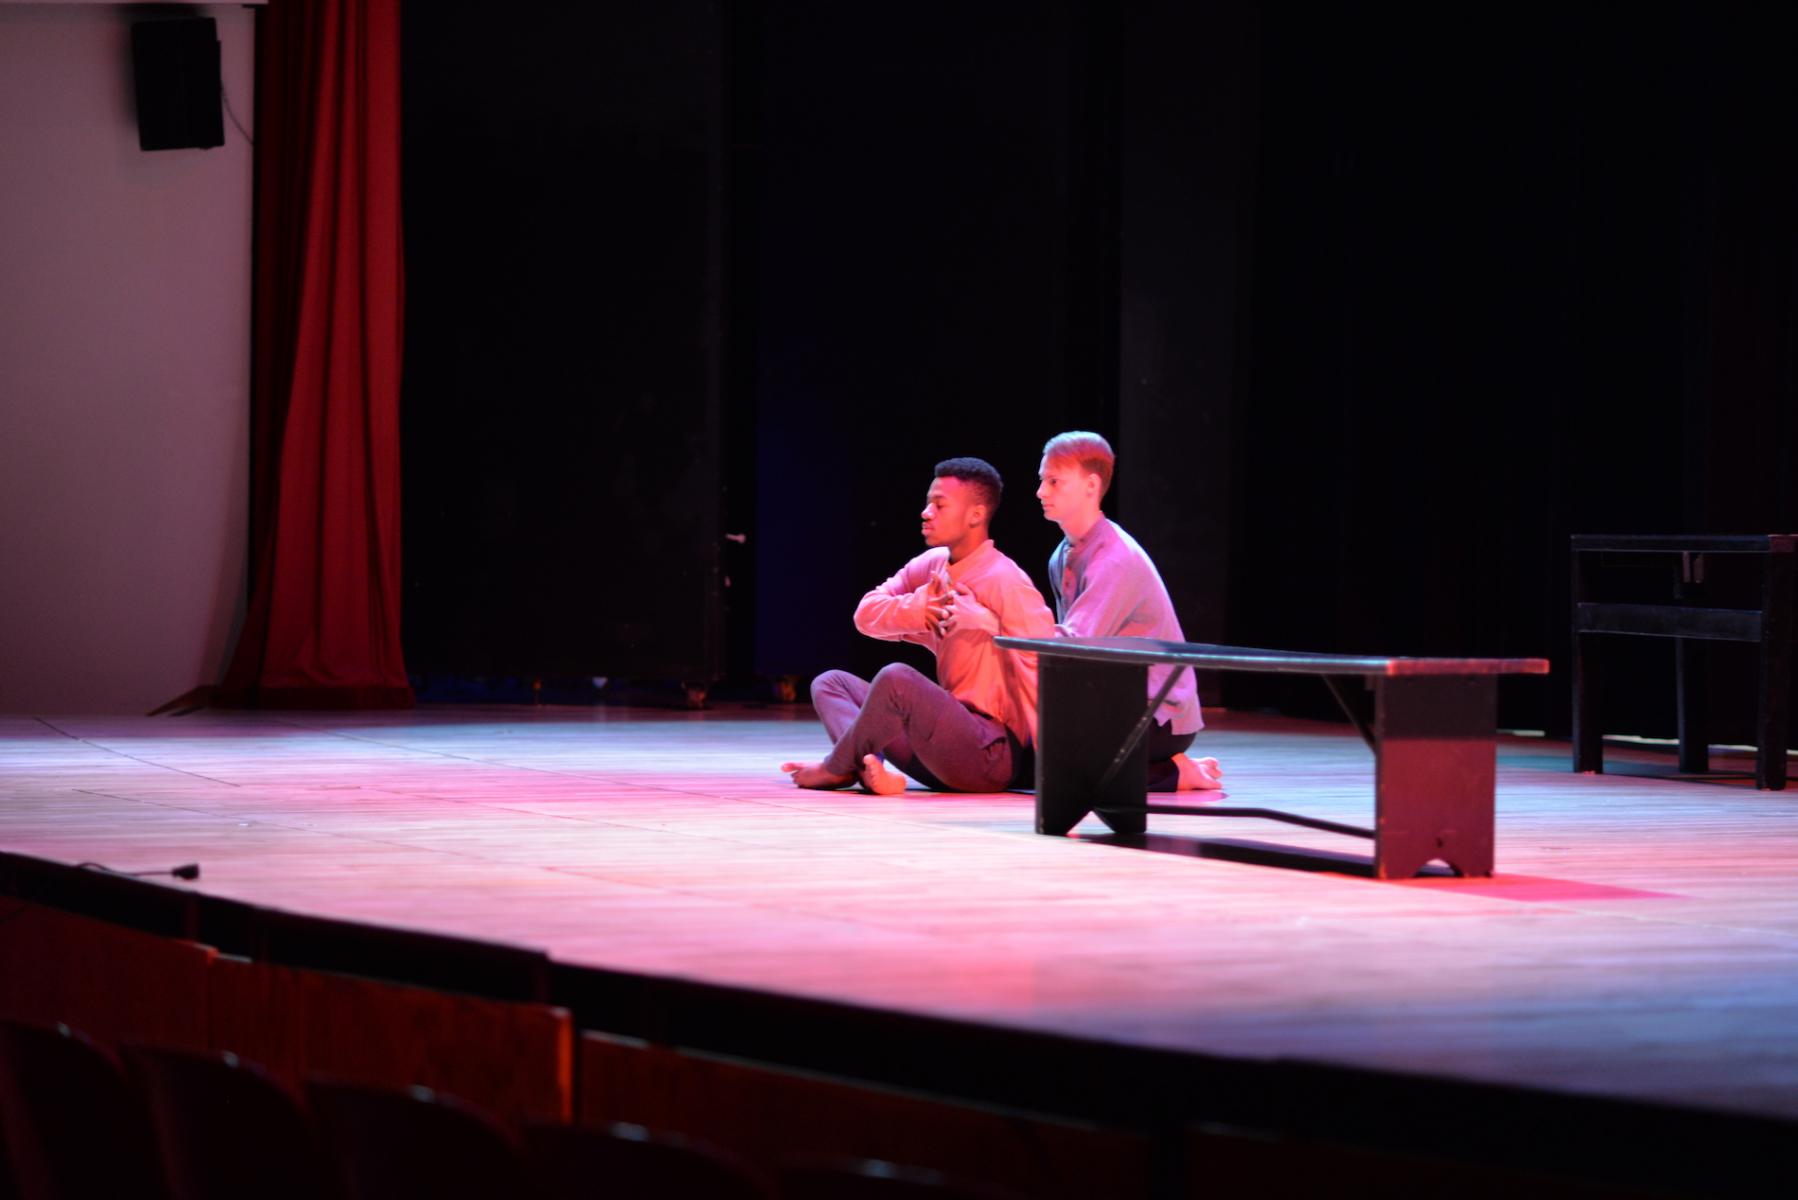 Dance piece performance image, two men sitting together on the ground holding hands.